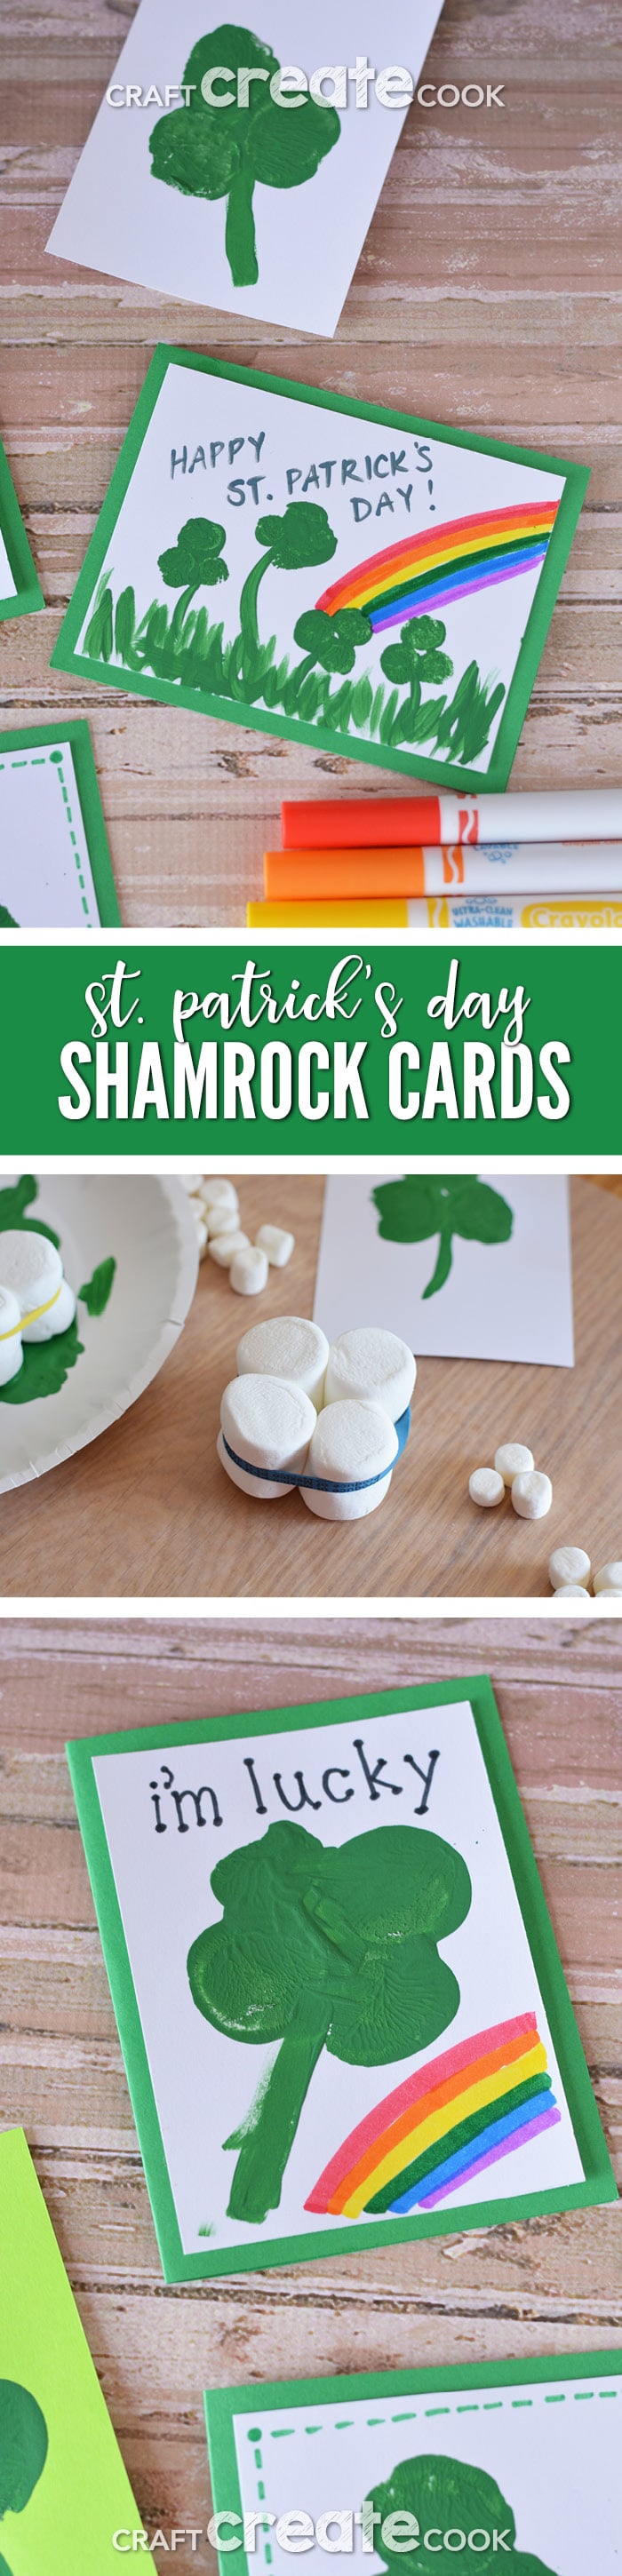 st-patrick-s-day-cards-for-kids-to-make-craft-create-cook